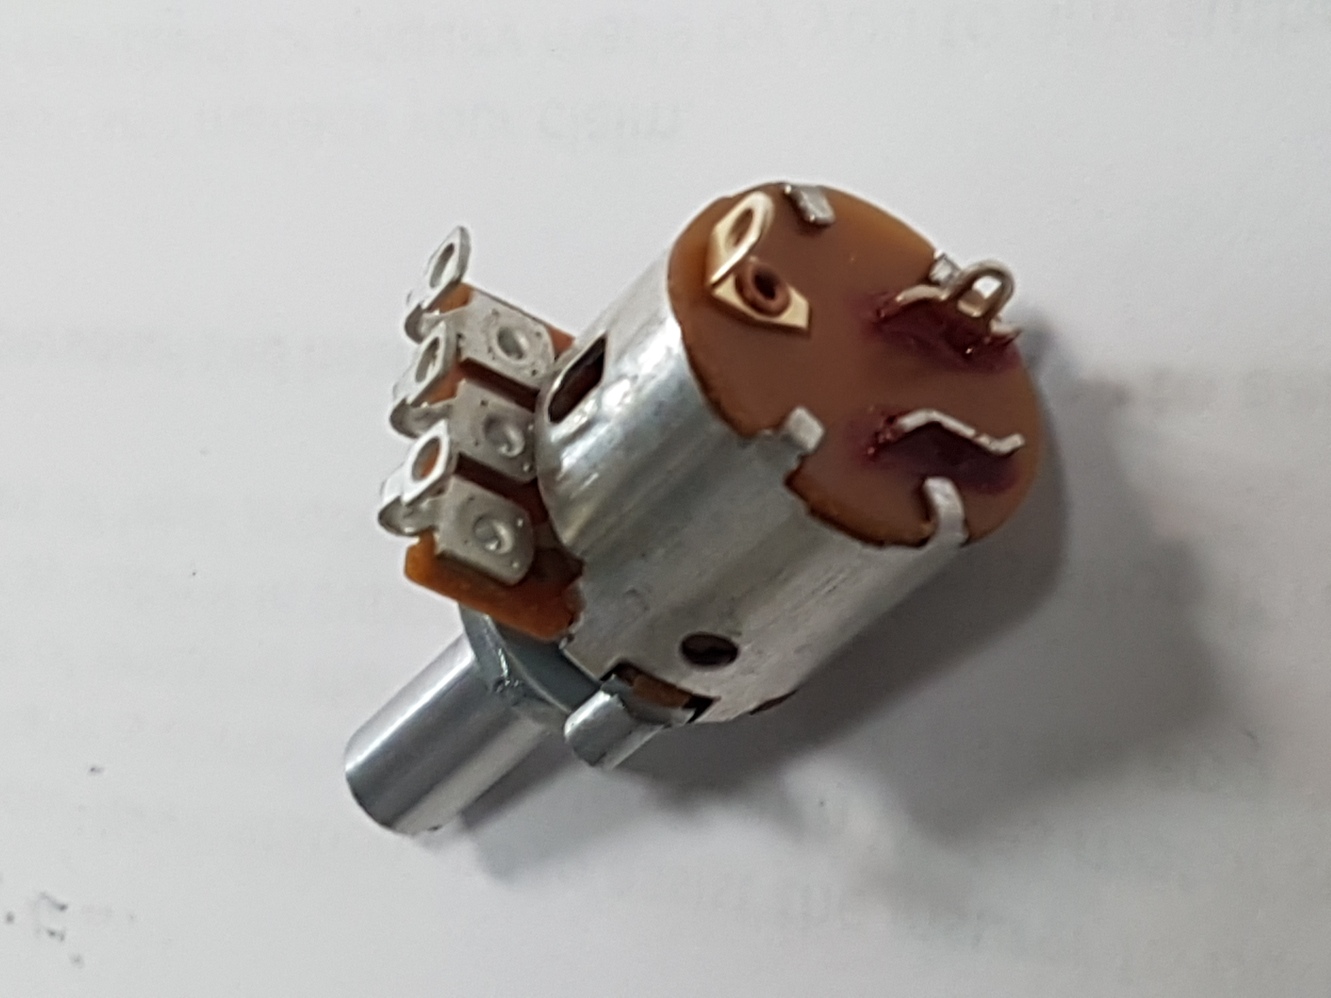 1K Switched Potentiometer